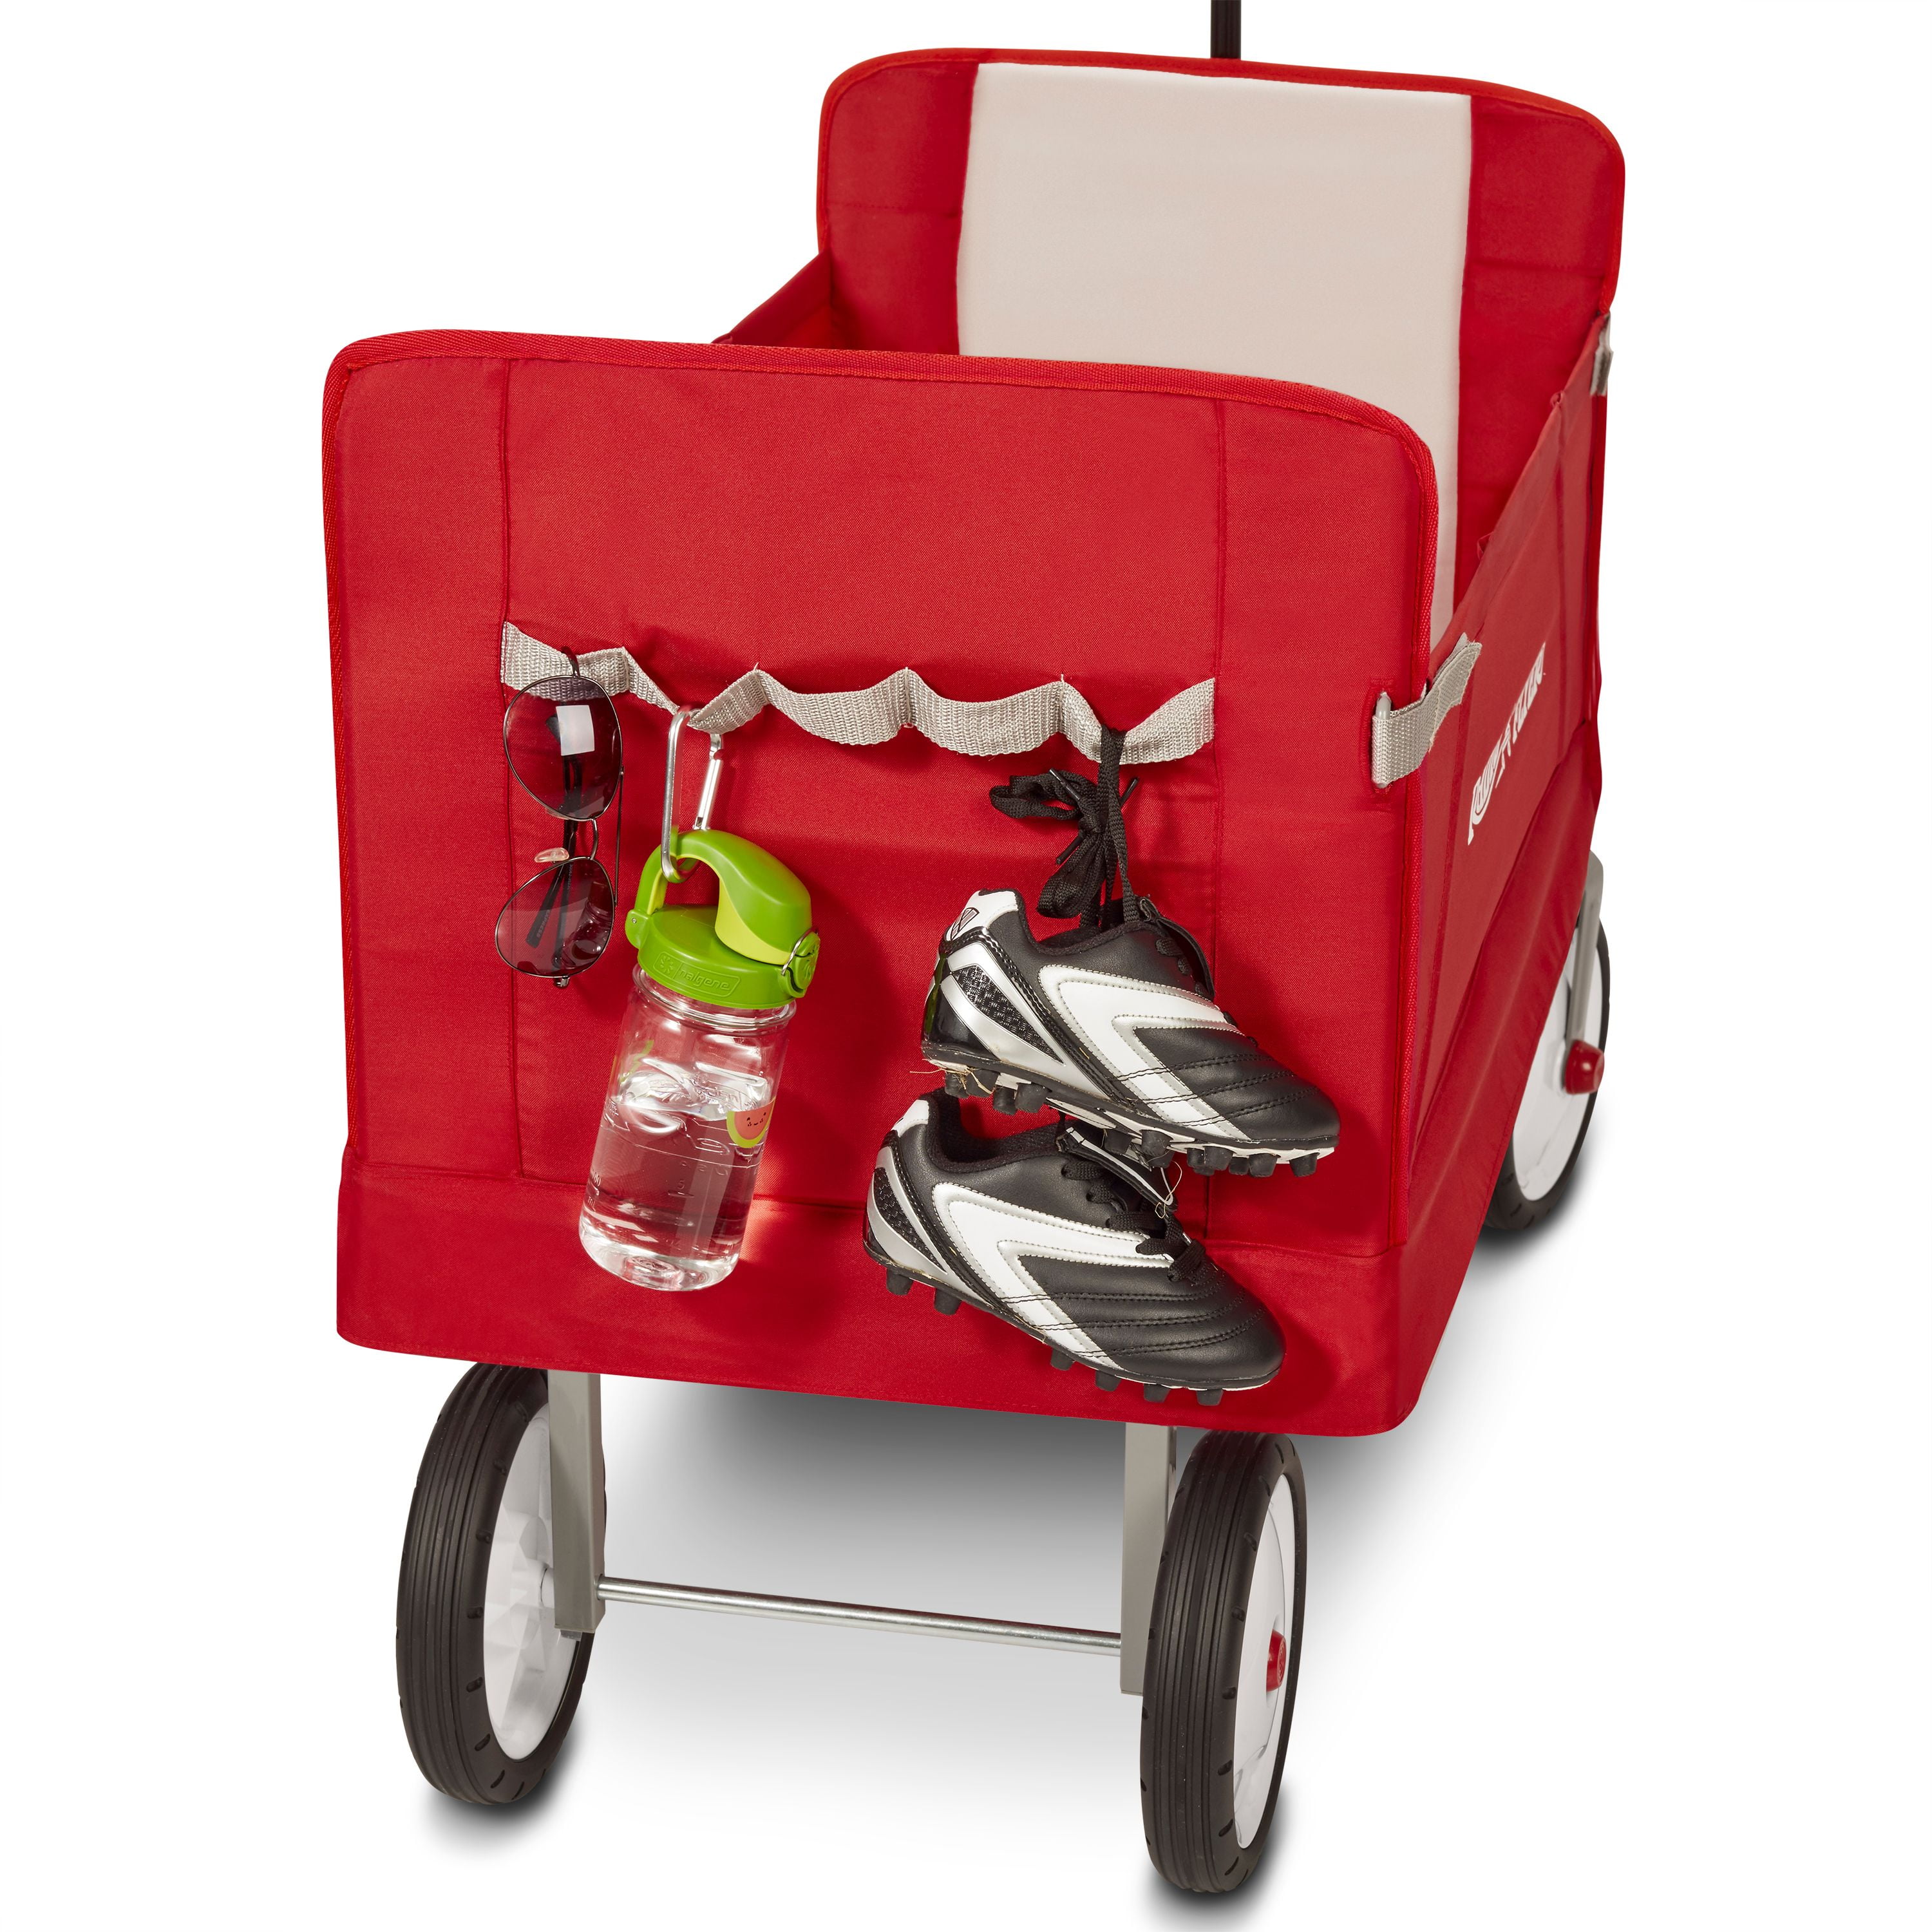 Radio Flyer, 3-in-1 EZ Fold Wagon, Padded Seat with Seat Belts, Red - 2